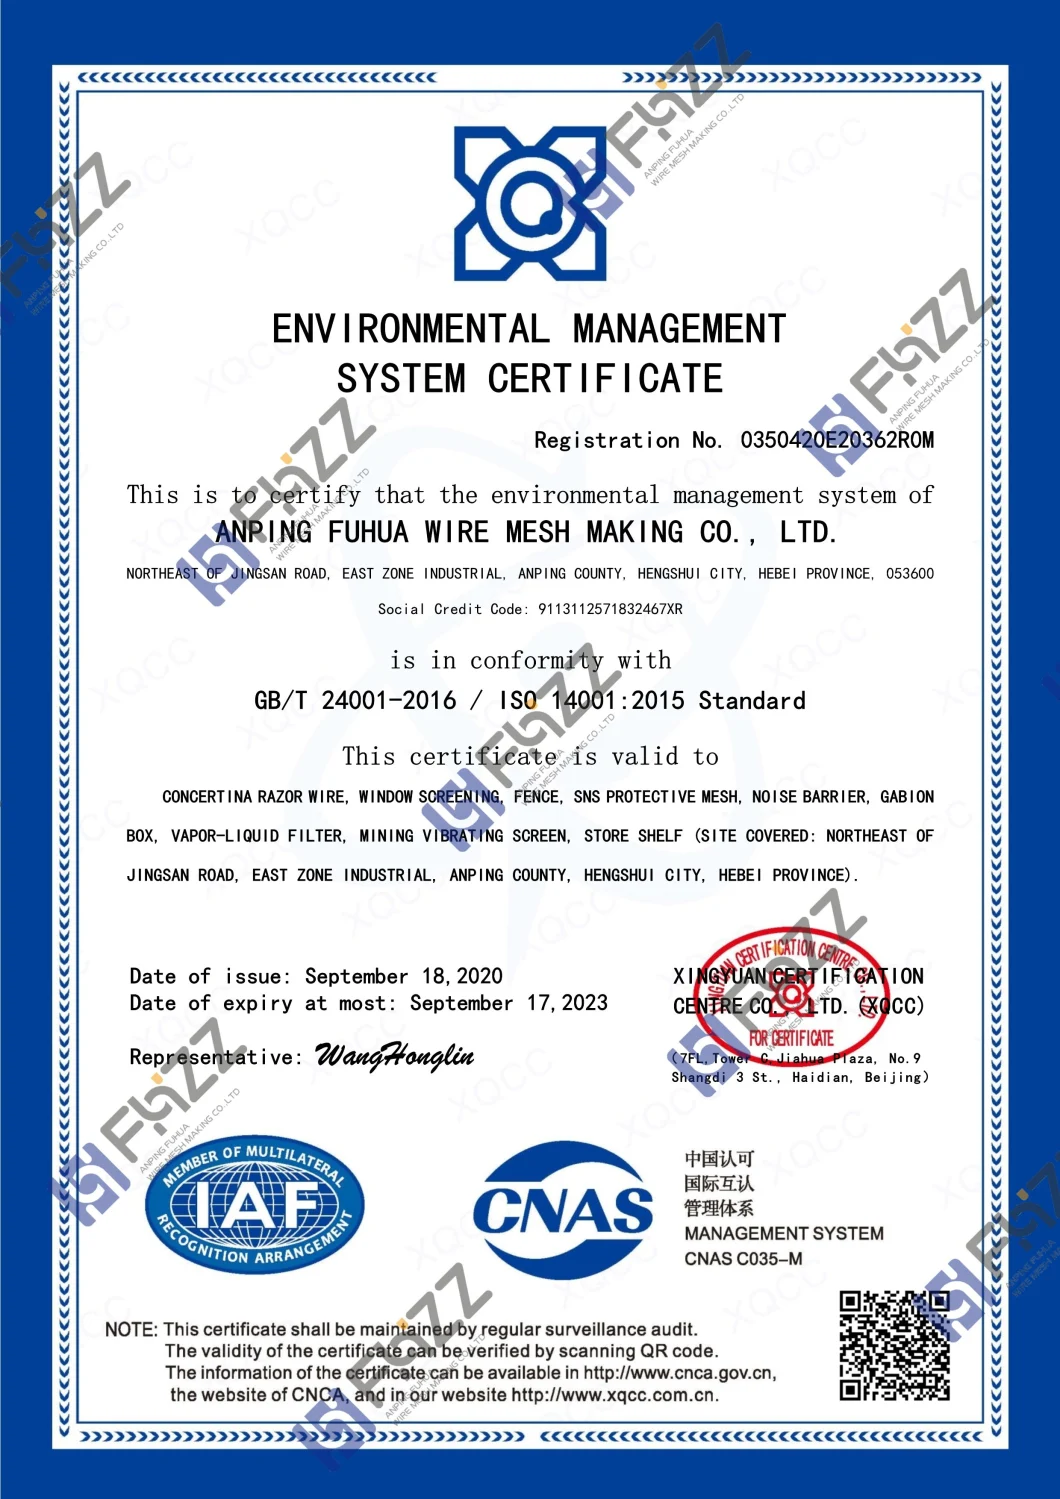 Our Company International certification